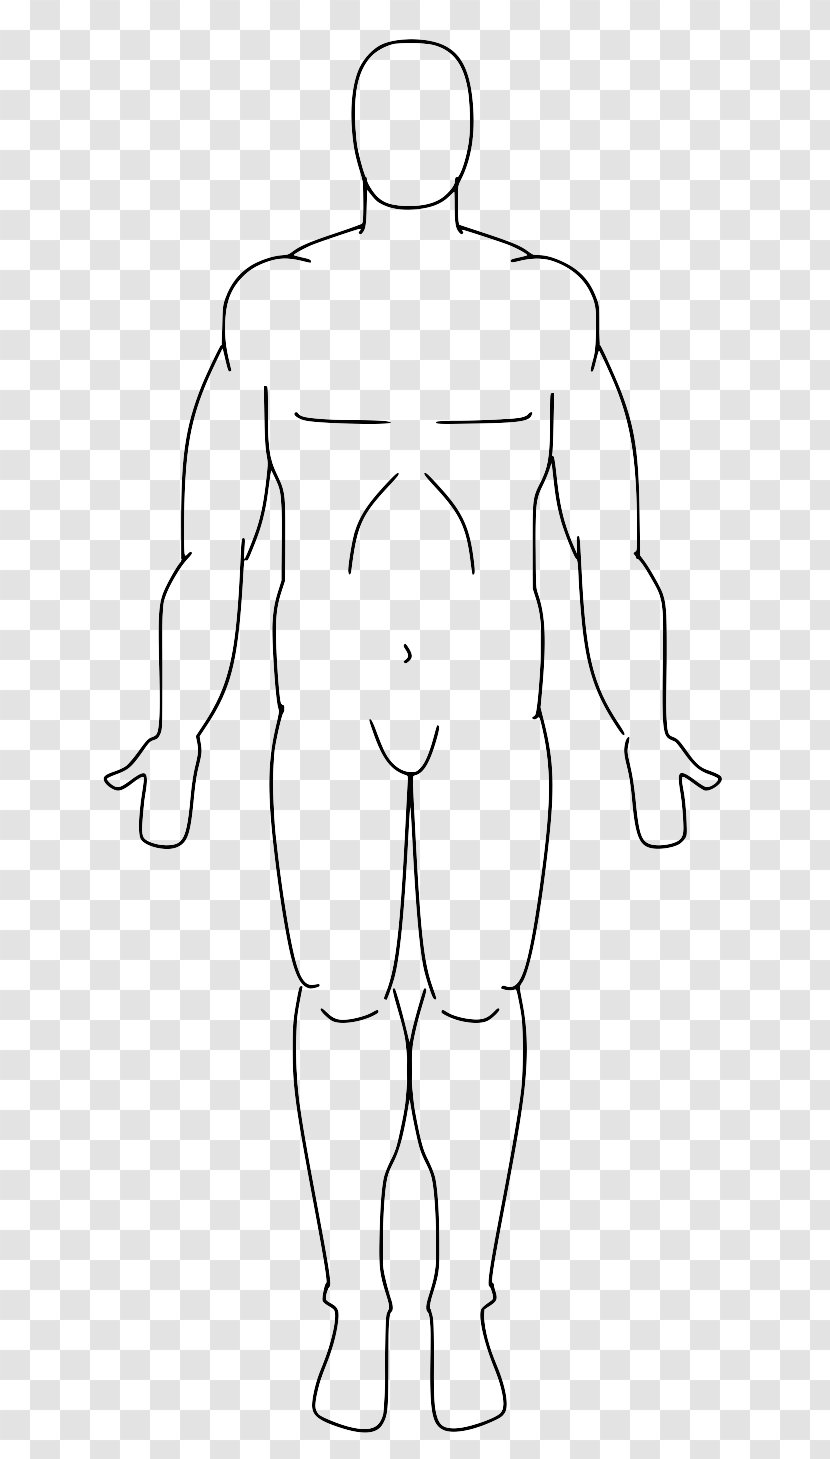 Standard Anatomical Position Anatomy Human Body Facts Plane - Frame - Lining Transparent PNG